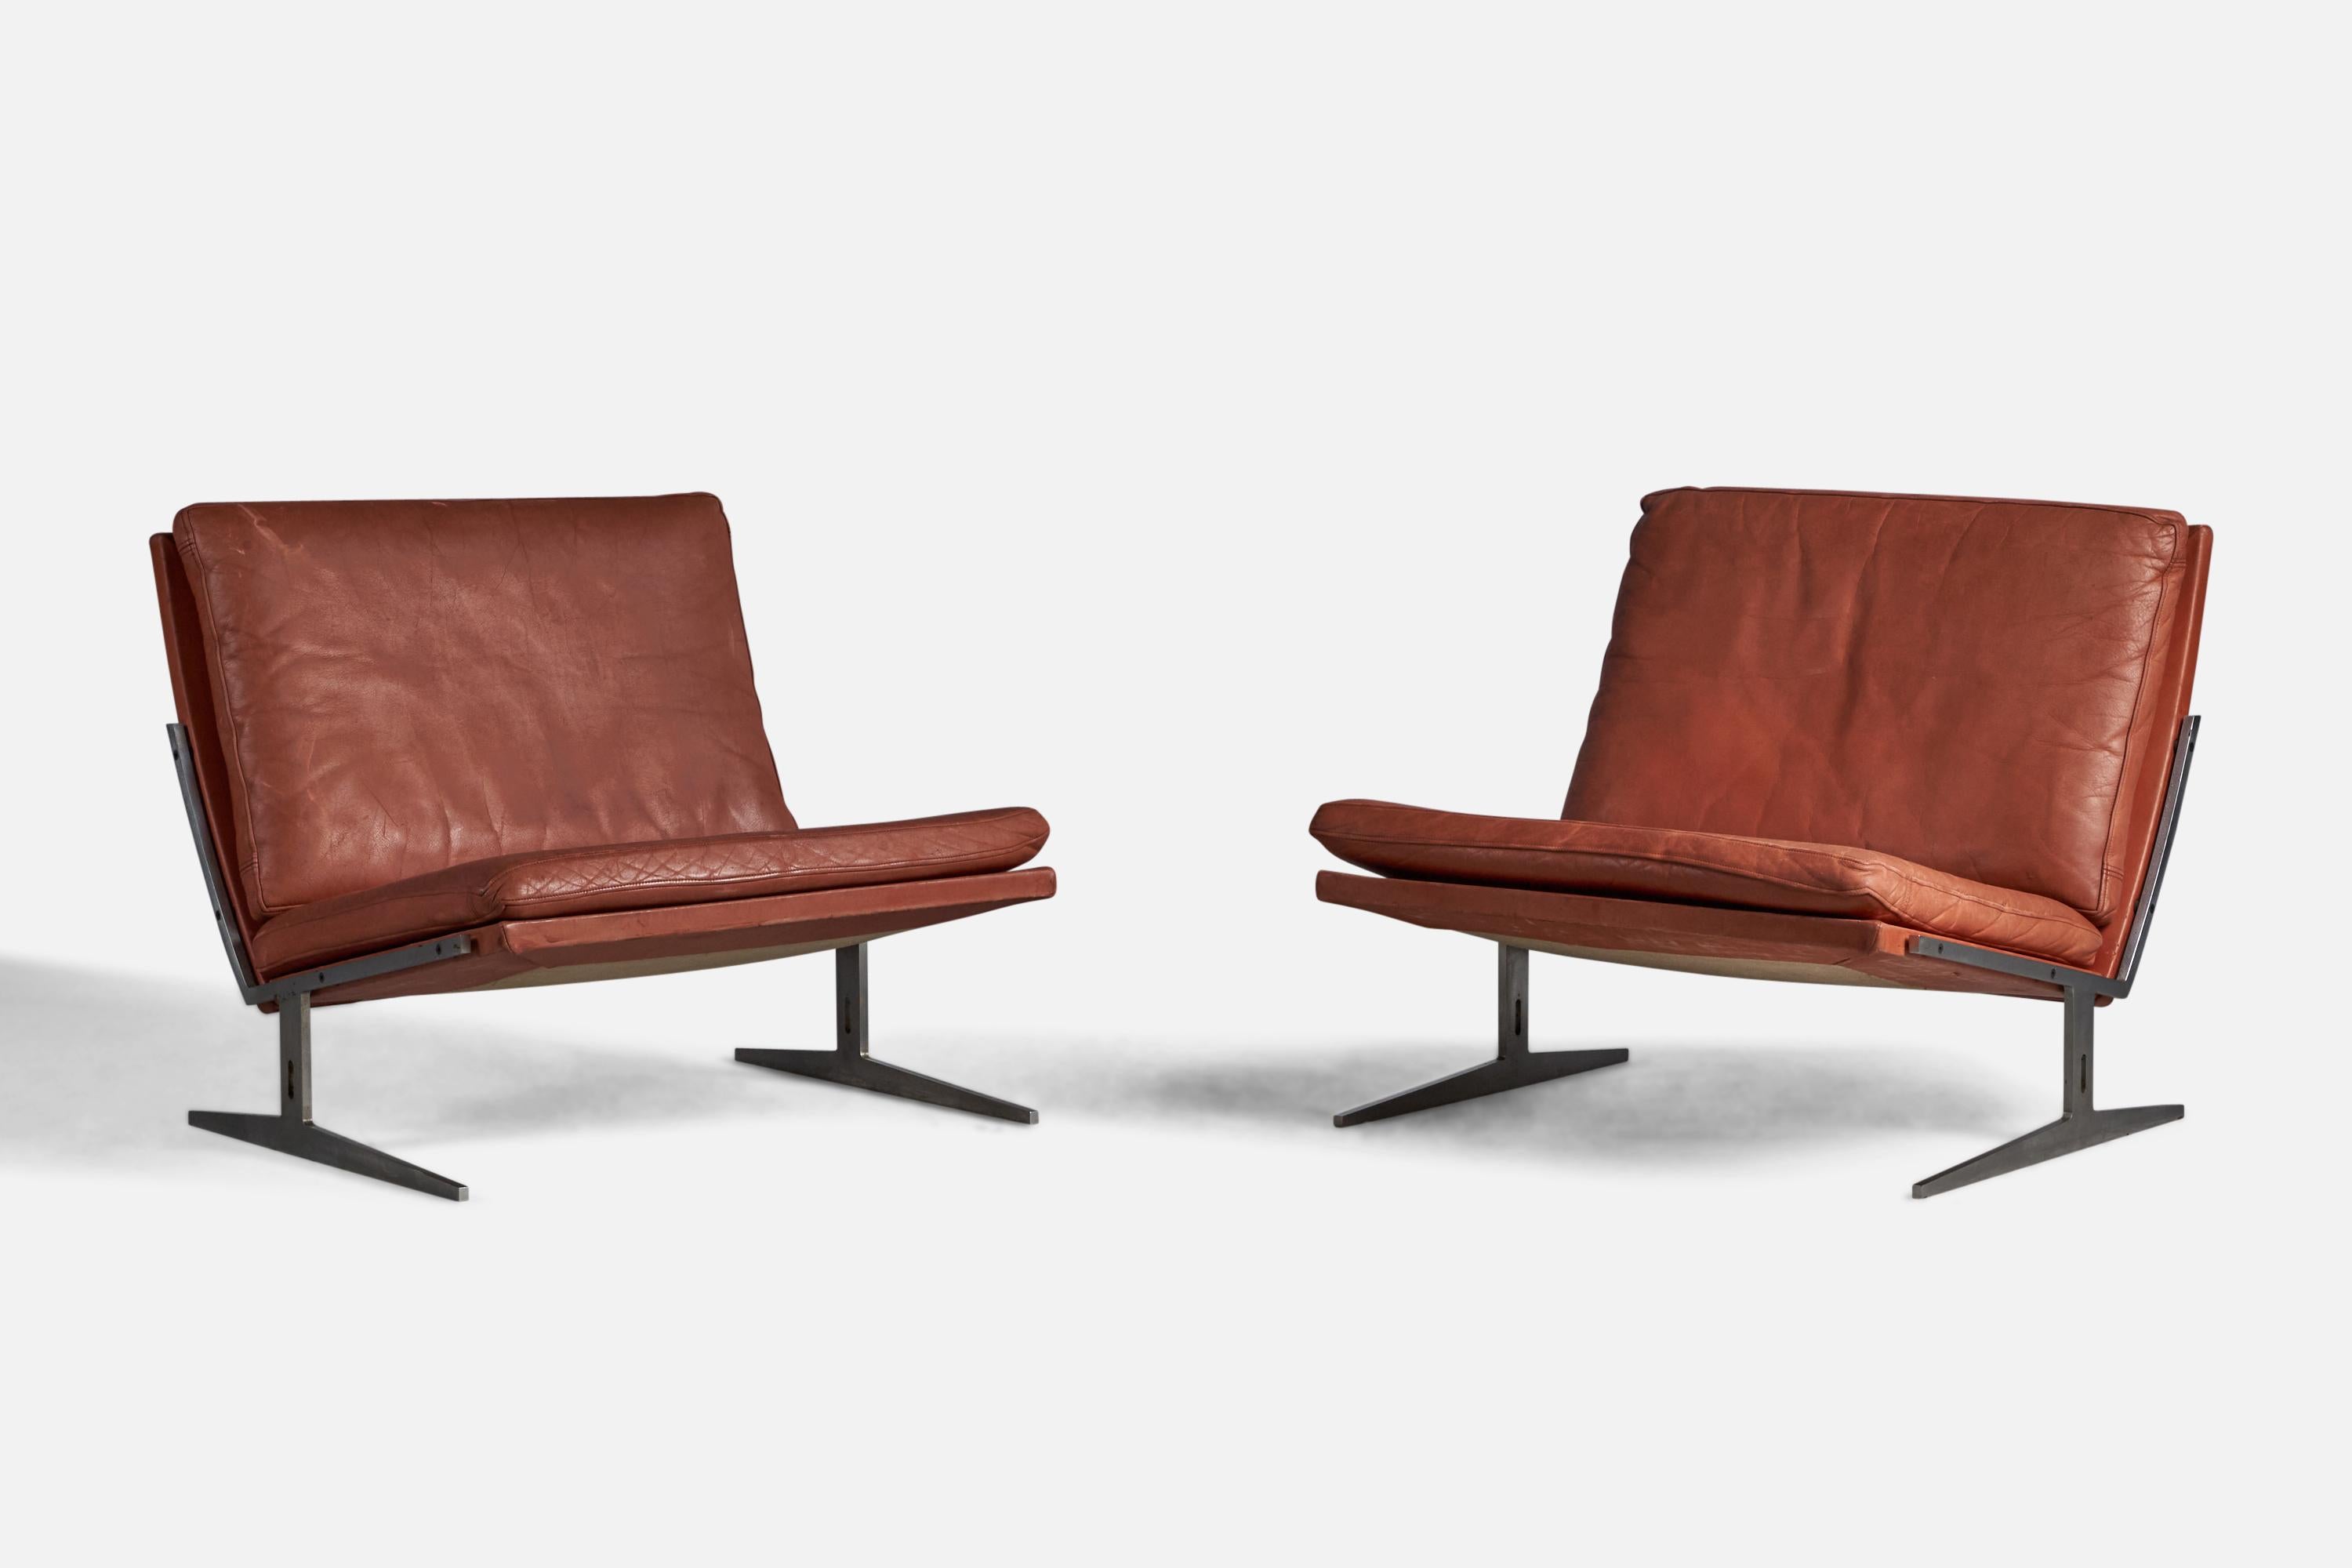 A pair of steel and red leather lounge or slipper chairs designed by Preben Fabricius & Jørgen Kastholm and produced by Bo-Ex, Denmark, 1960.

12” seat height